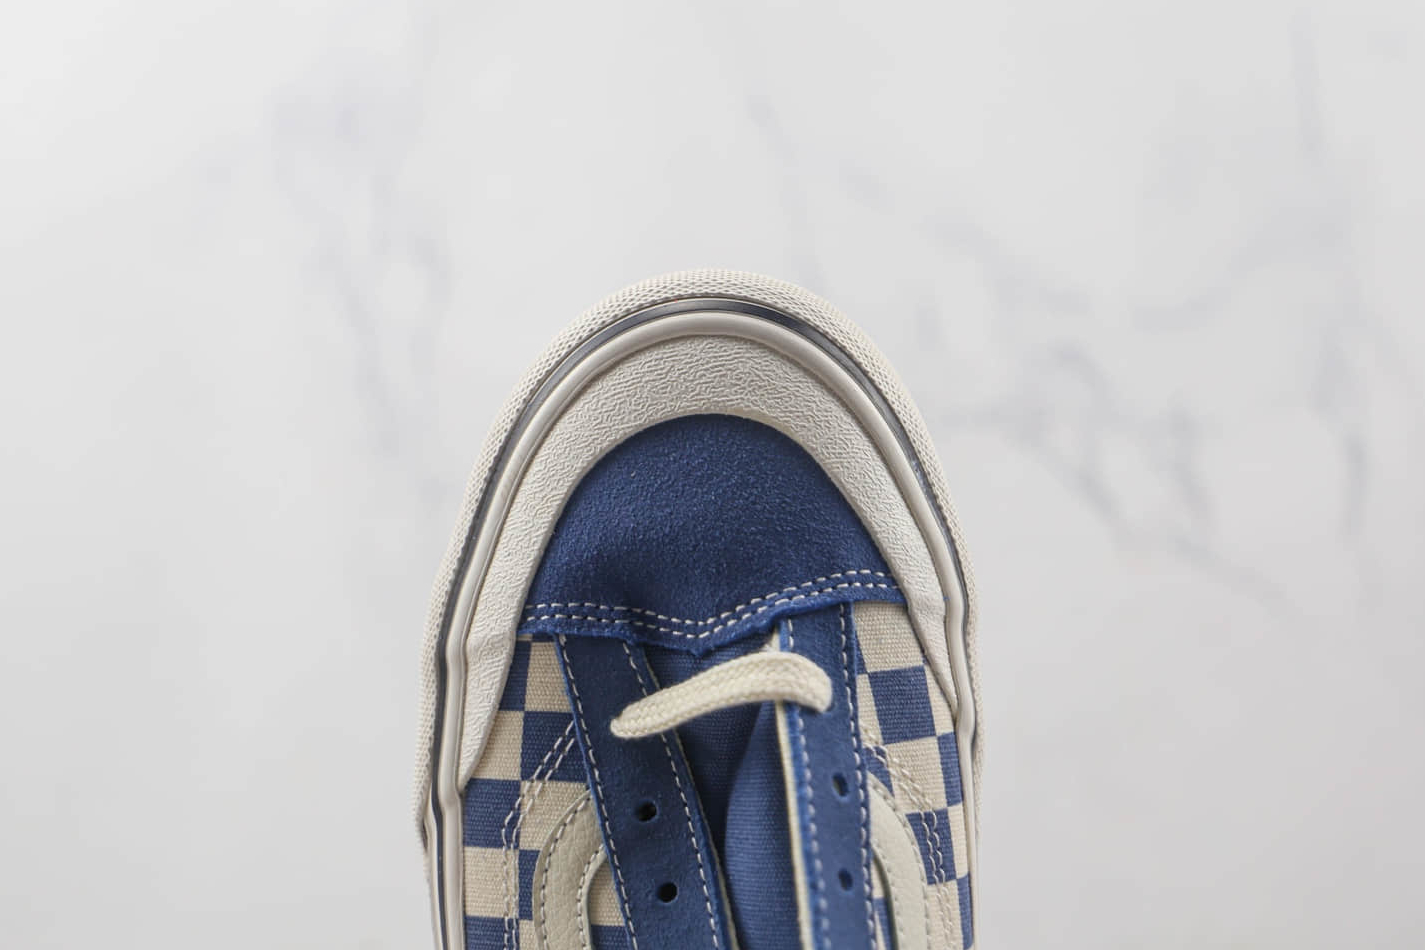 Vans Style 36 SF Classic Casual Skateboarding Shoes Blue Unisex - Trendy and Comfortable Footwear